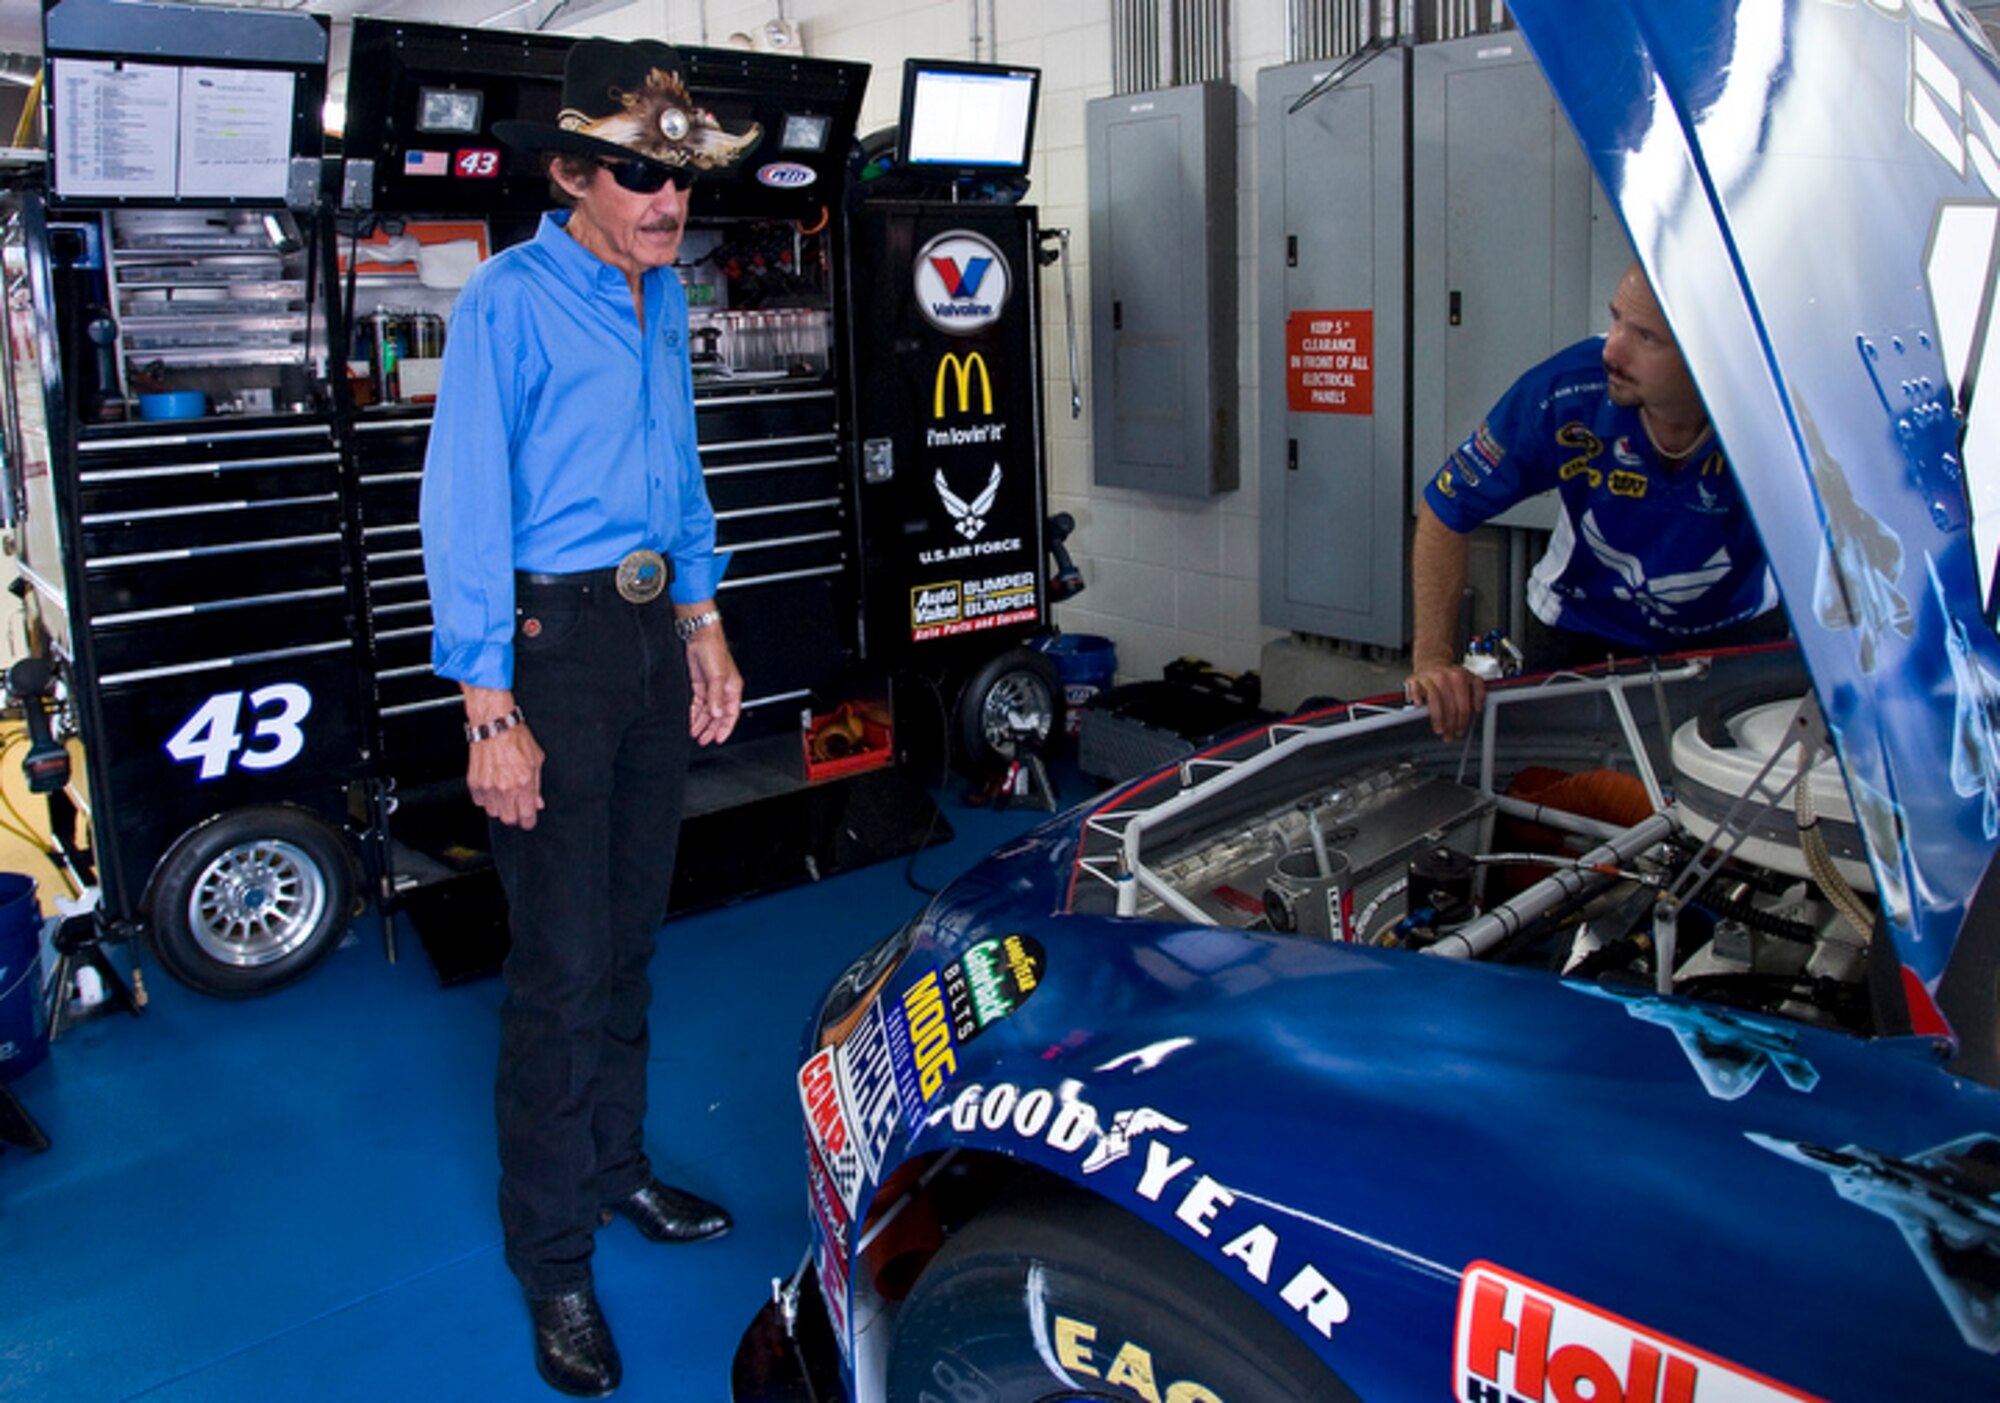 NASCAR legend Richard Petty checks the status of the #43 Air Force Dodge Charger, one of four cars he oversees under Richard Petty Motorosports brand May 23 before NASCAR's Coca-Cola 600 Sprint Cup race at Lowe's Motor Speedway, Charlotte, N.C. 
(U.S. Air Force photo by/Staff Sgt. Bennie J. Davis III)